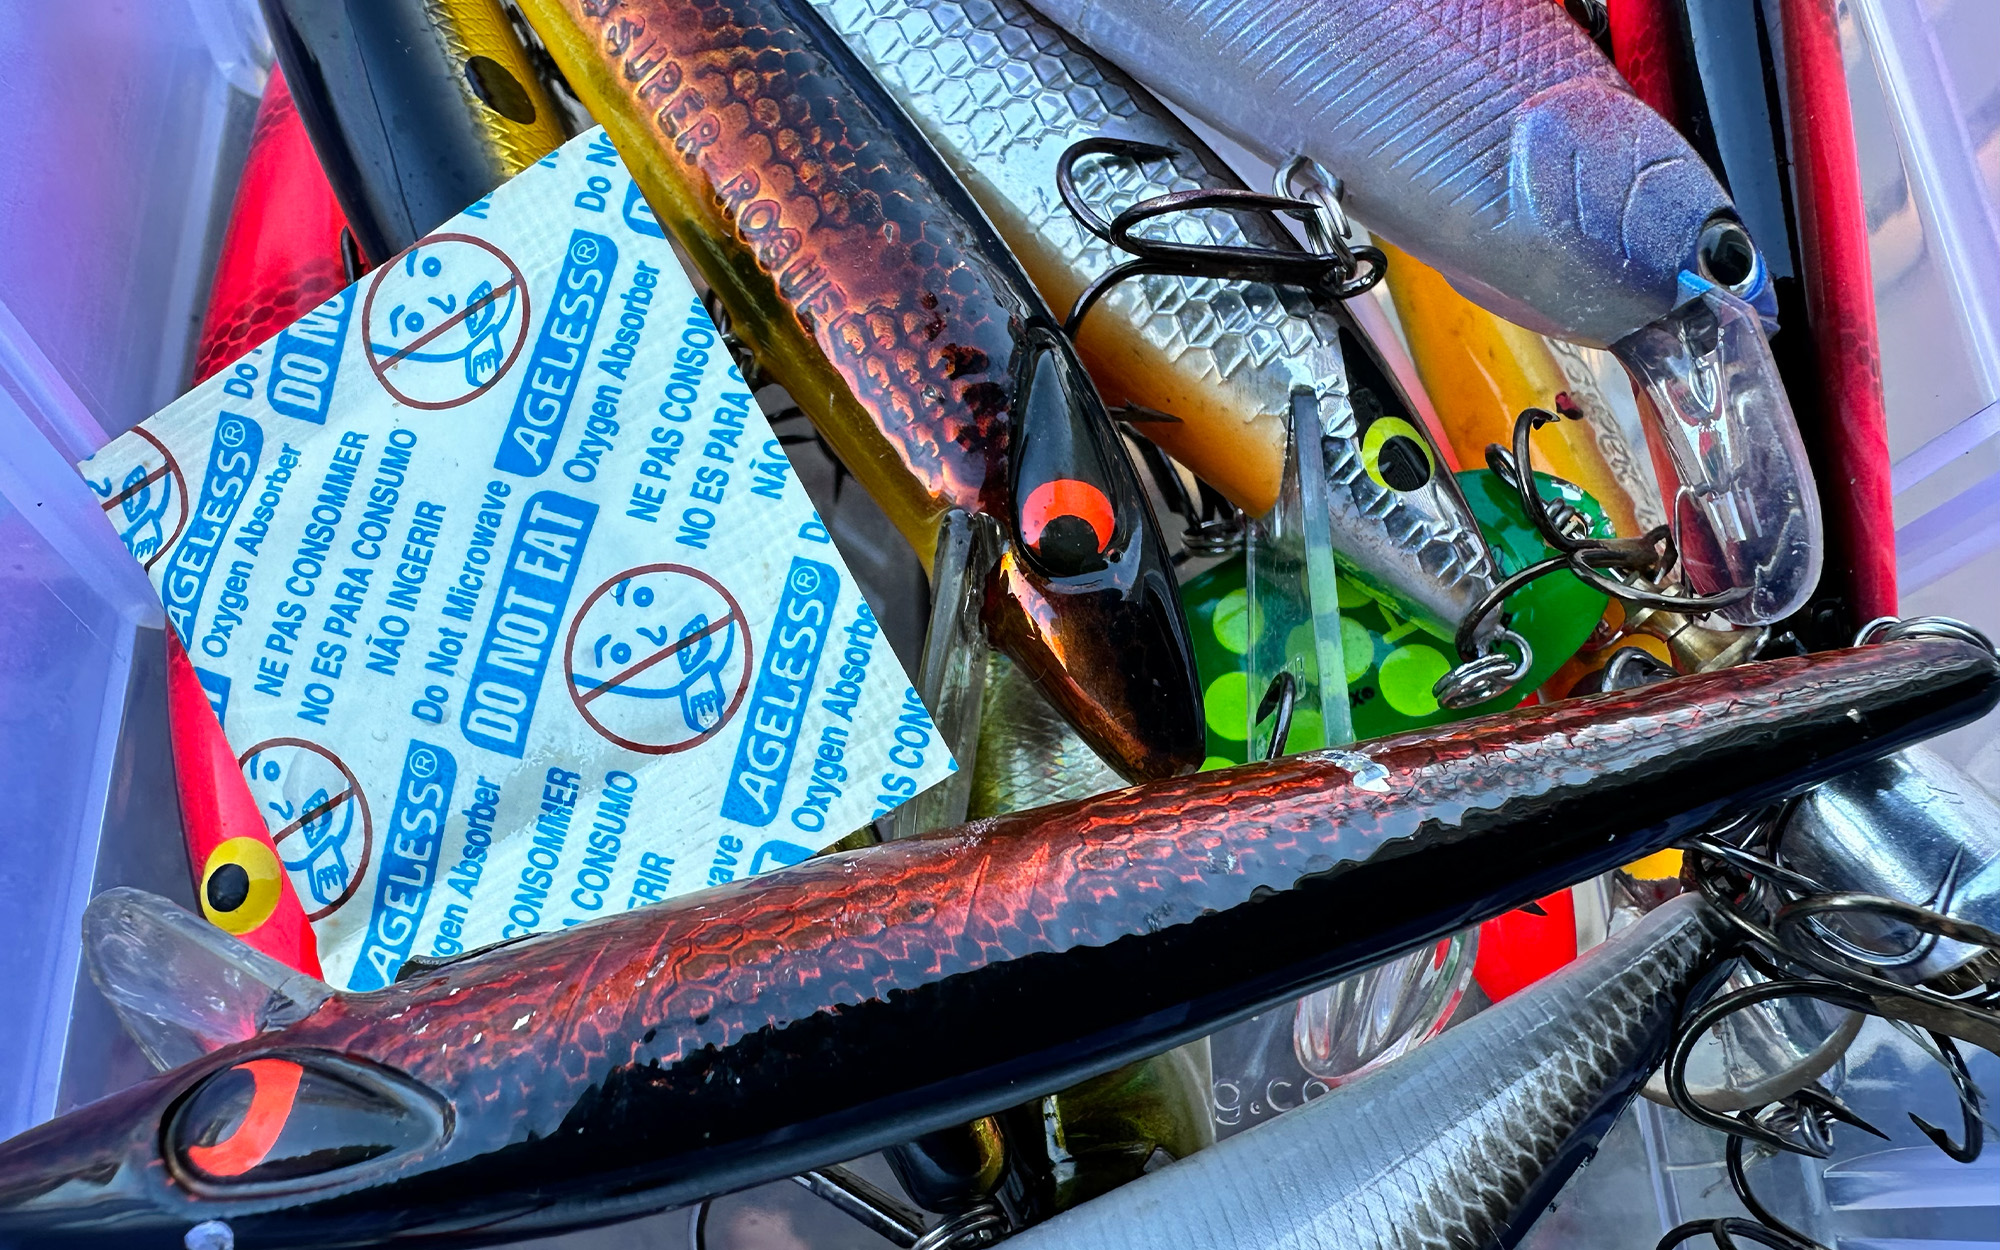 How to Restore Old Fishing Lures